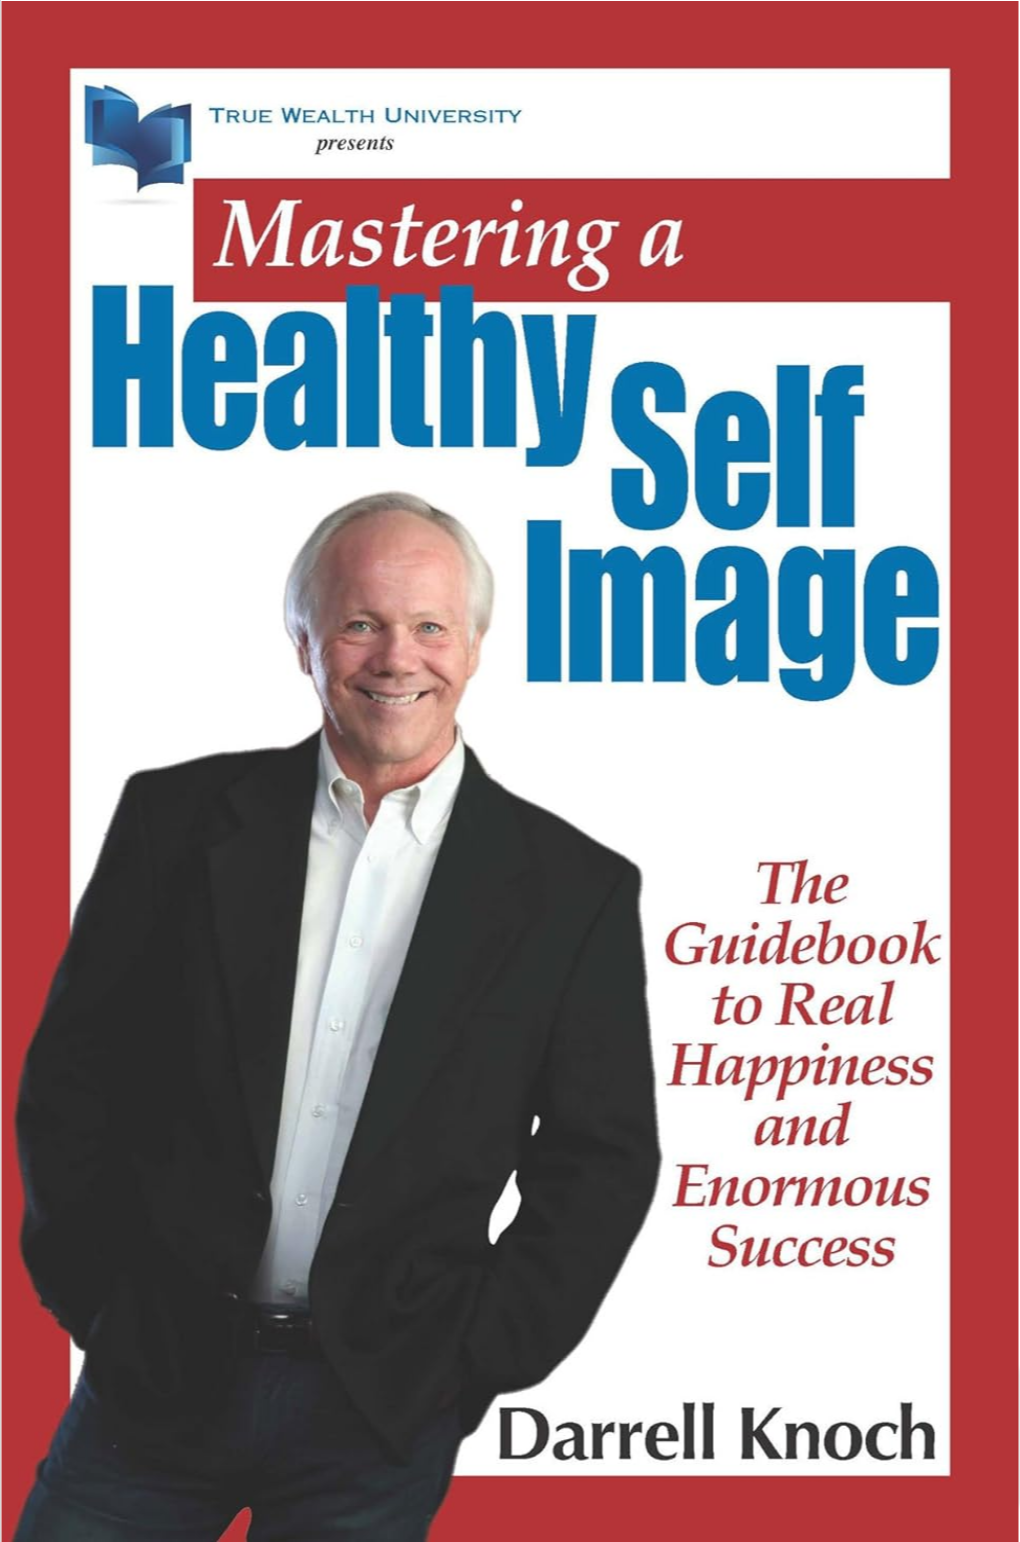 Mastering a Healthy Self Image Book Cover - Real Happiness and Success Guide